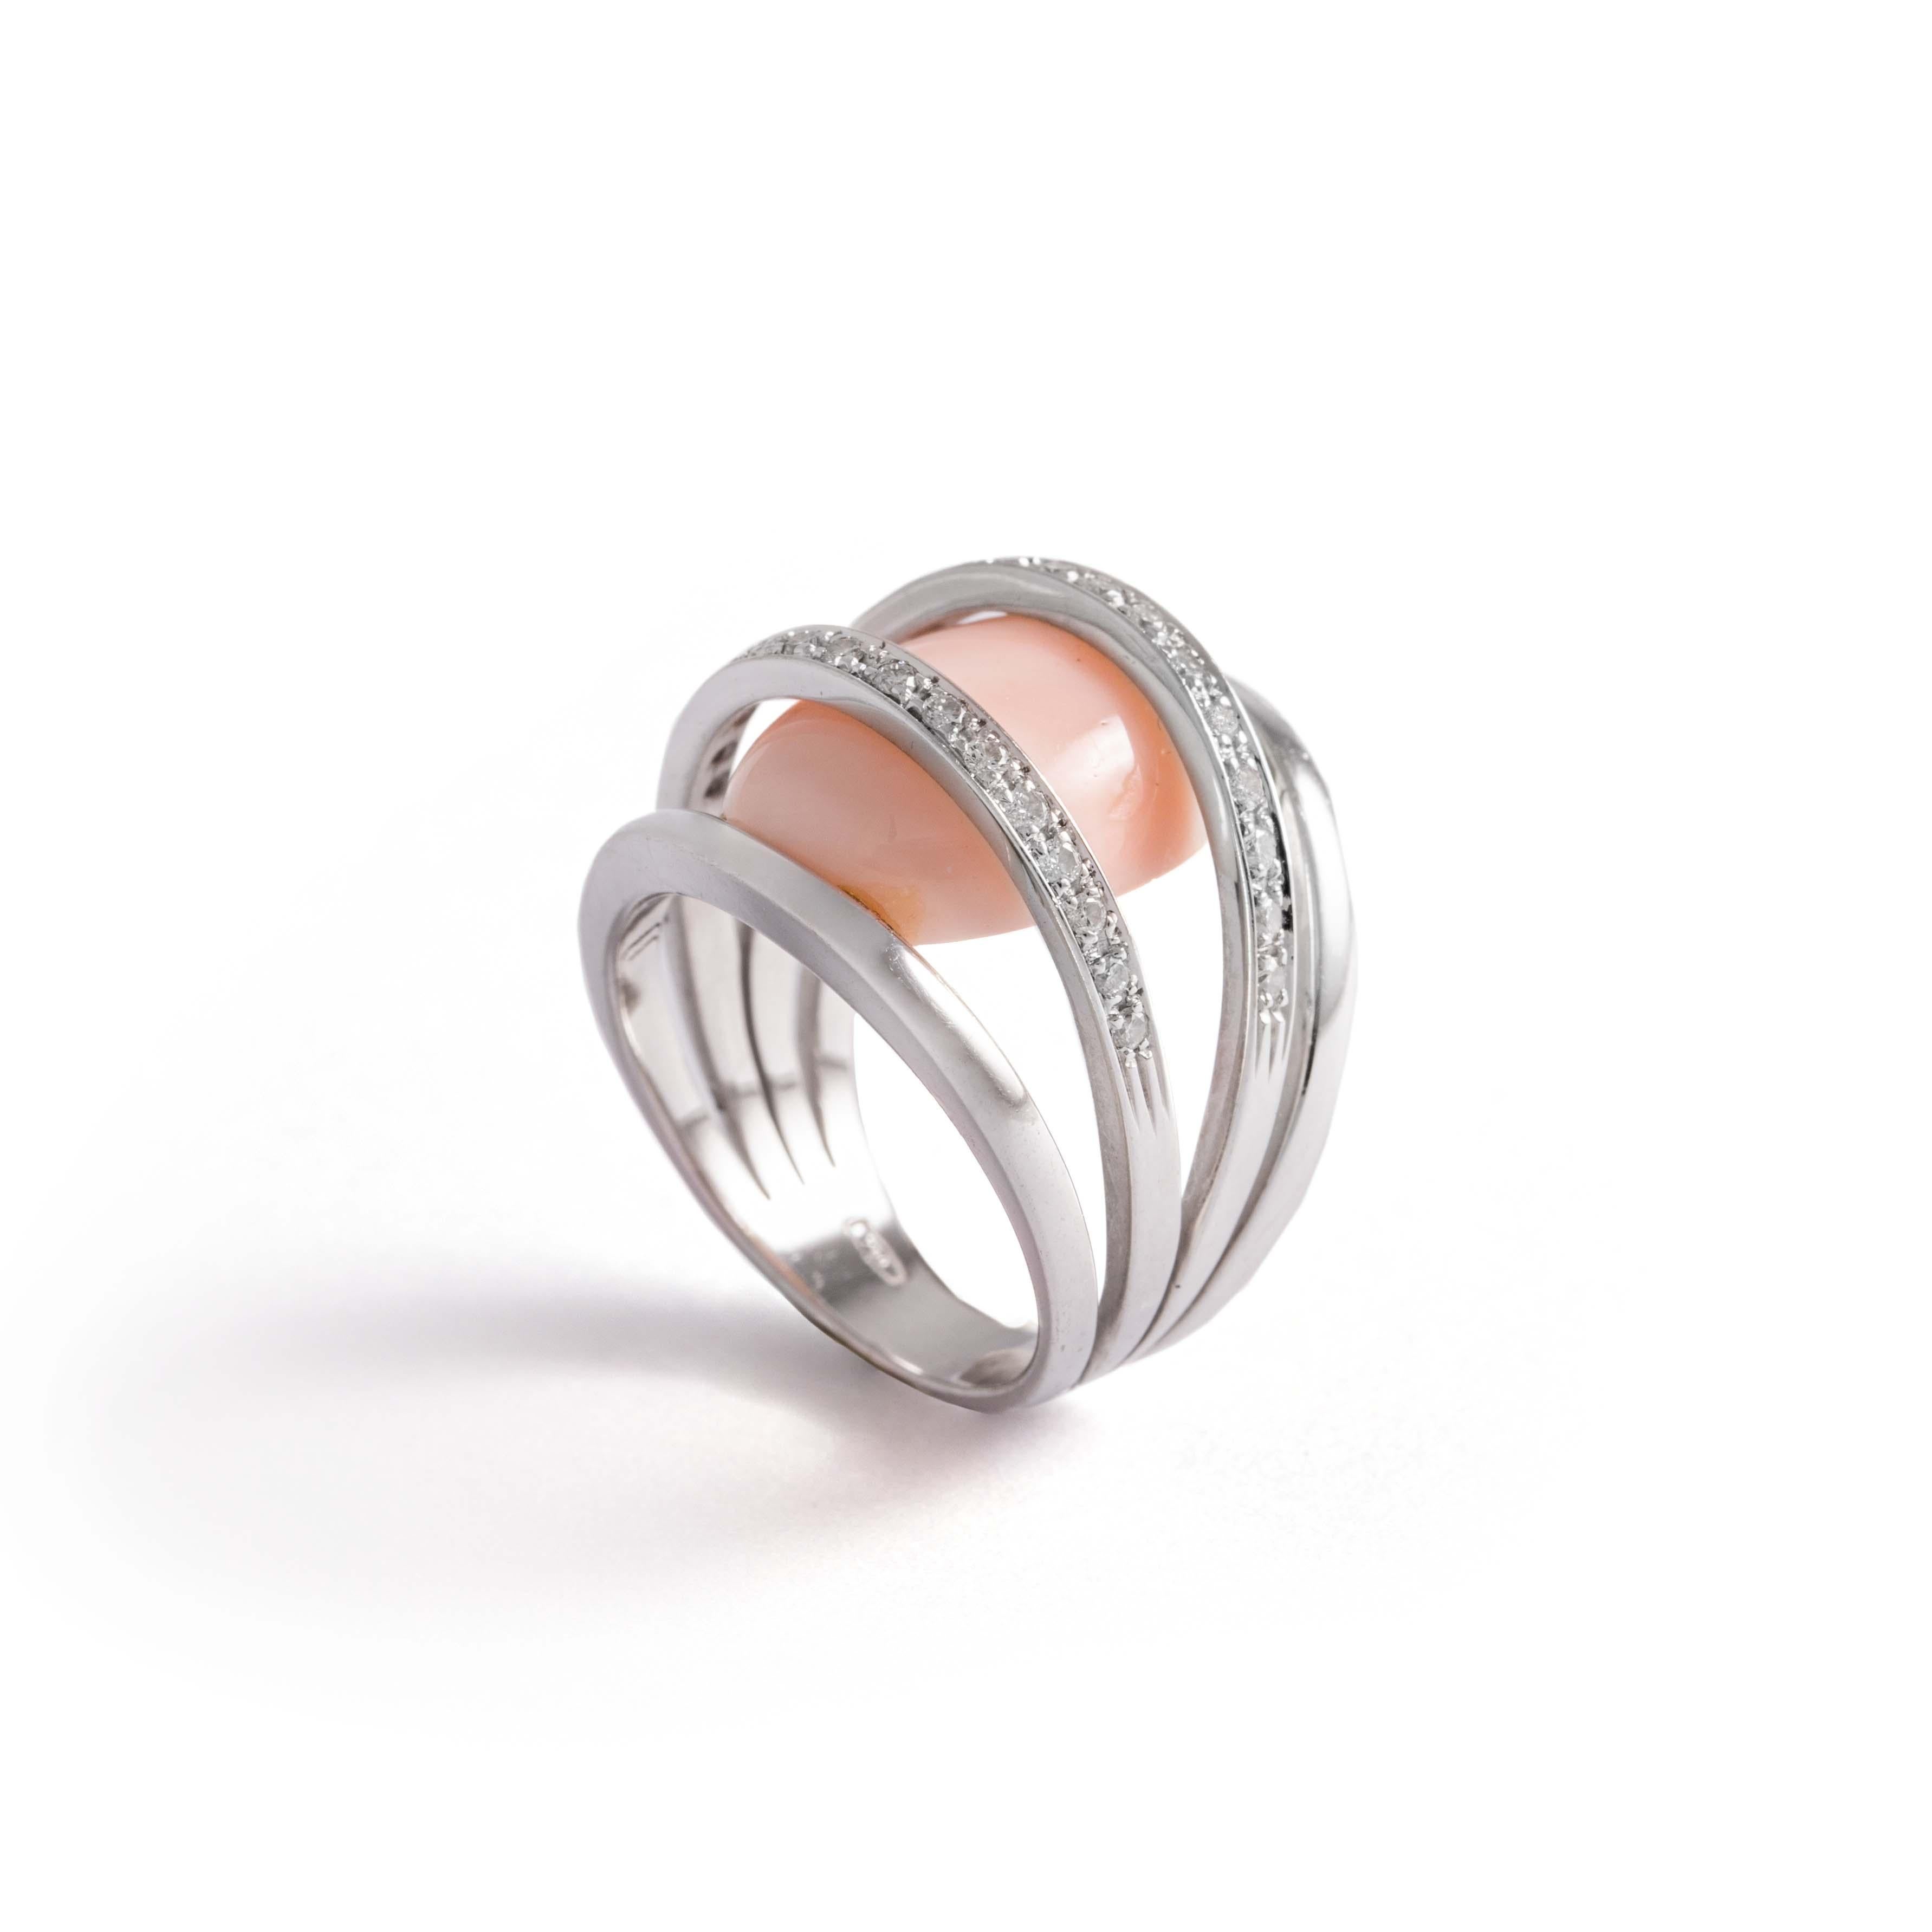 Women's or Men's White Gold Ring Set with Round-Cut Diamonds and Holding a Pink Hardstone For Sale